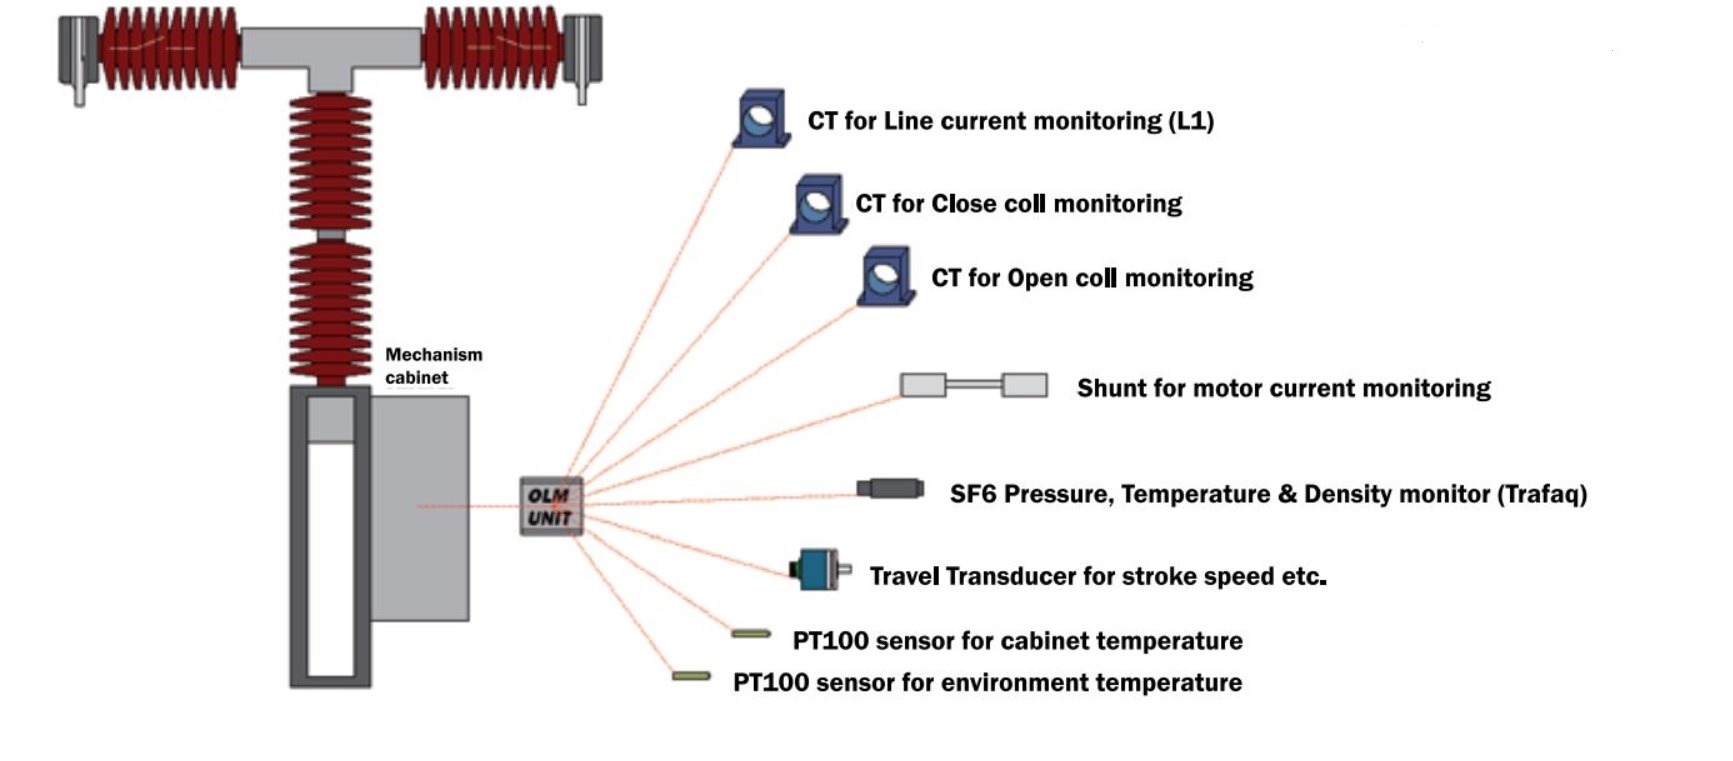 on line condition monitoring device olm2 on highvoltage circuitbreakers